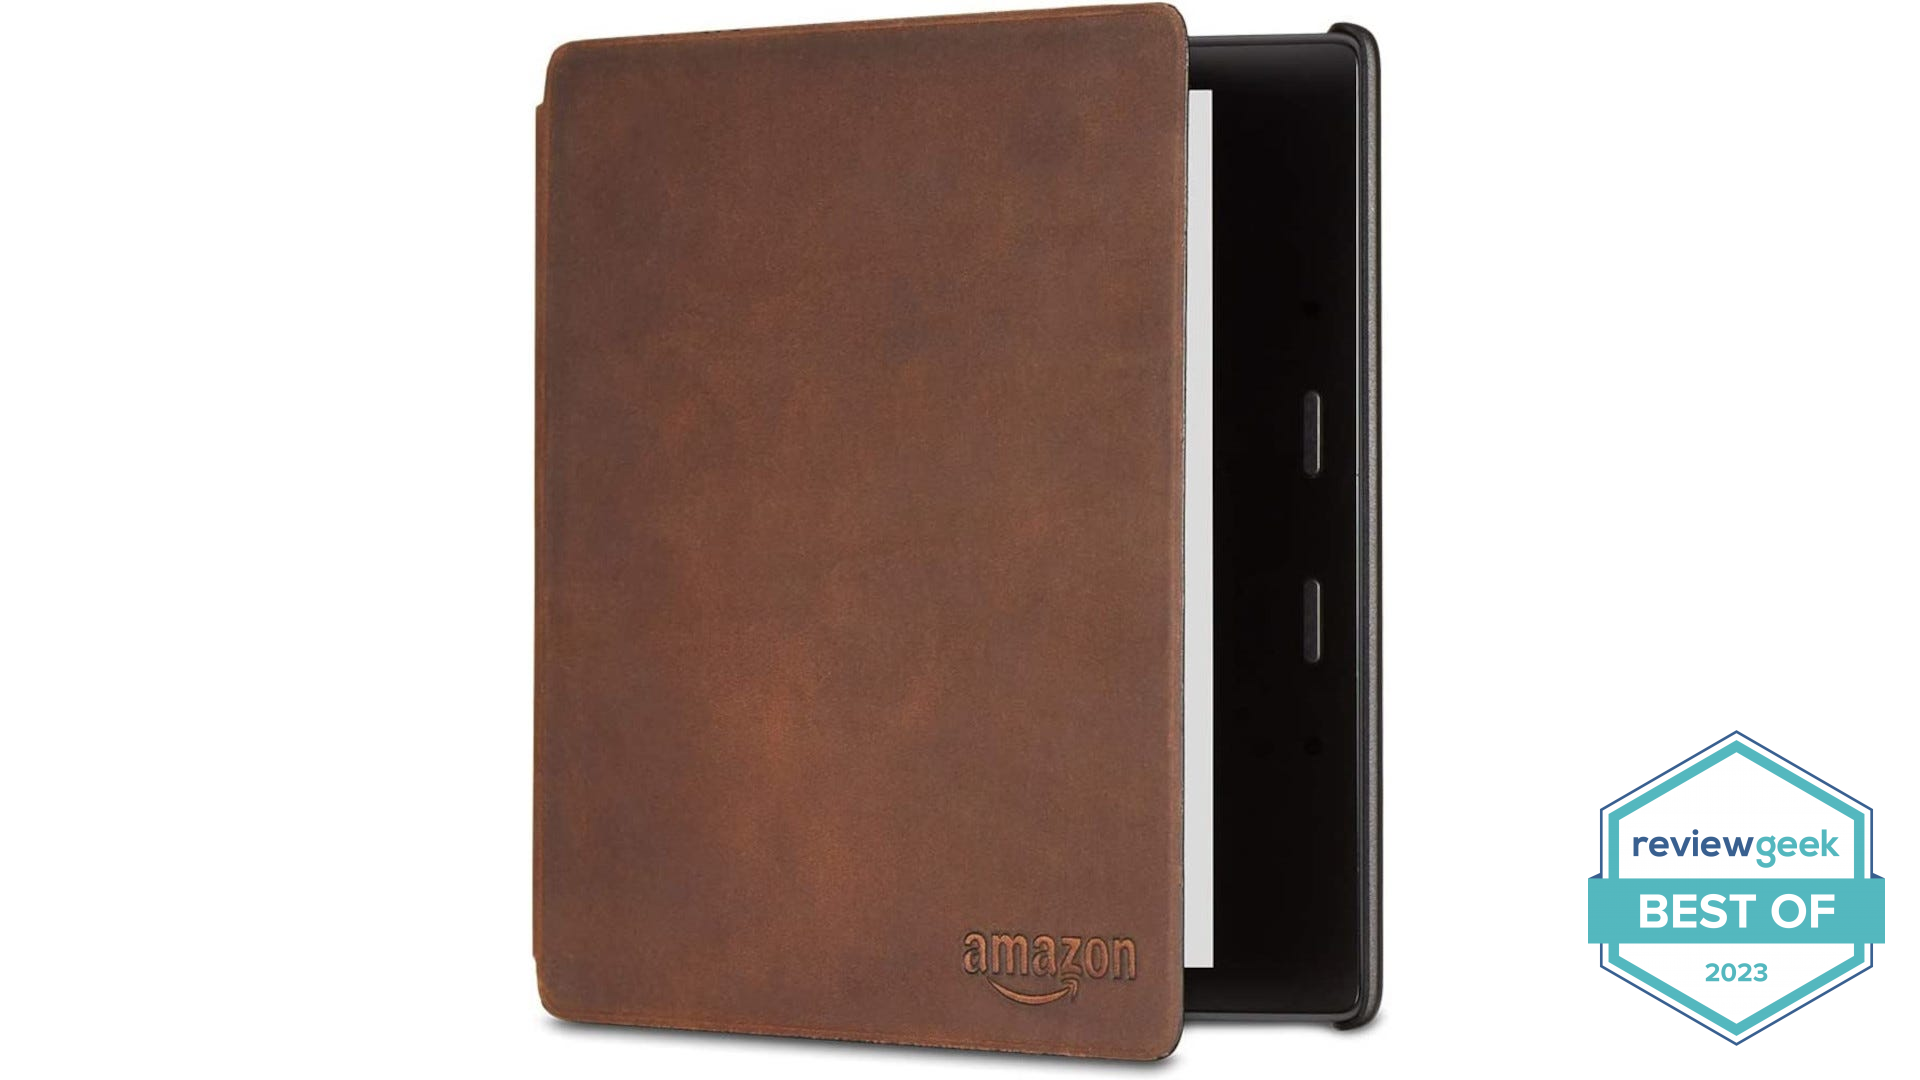 A leather Kindle Oasis case is shown partially open.